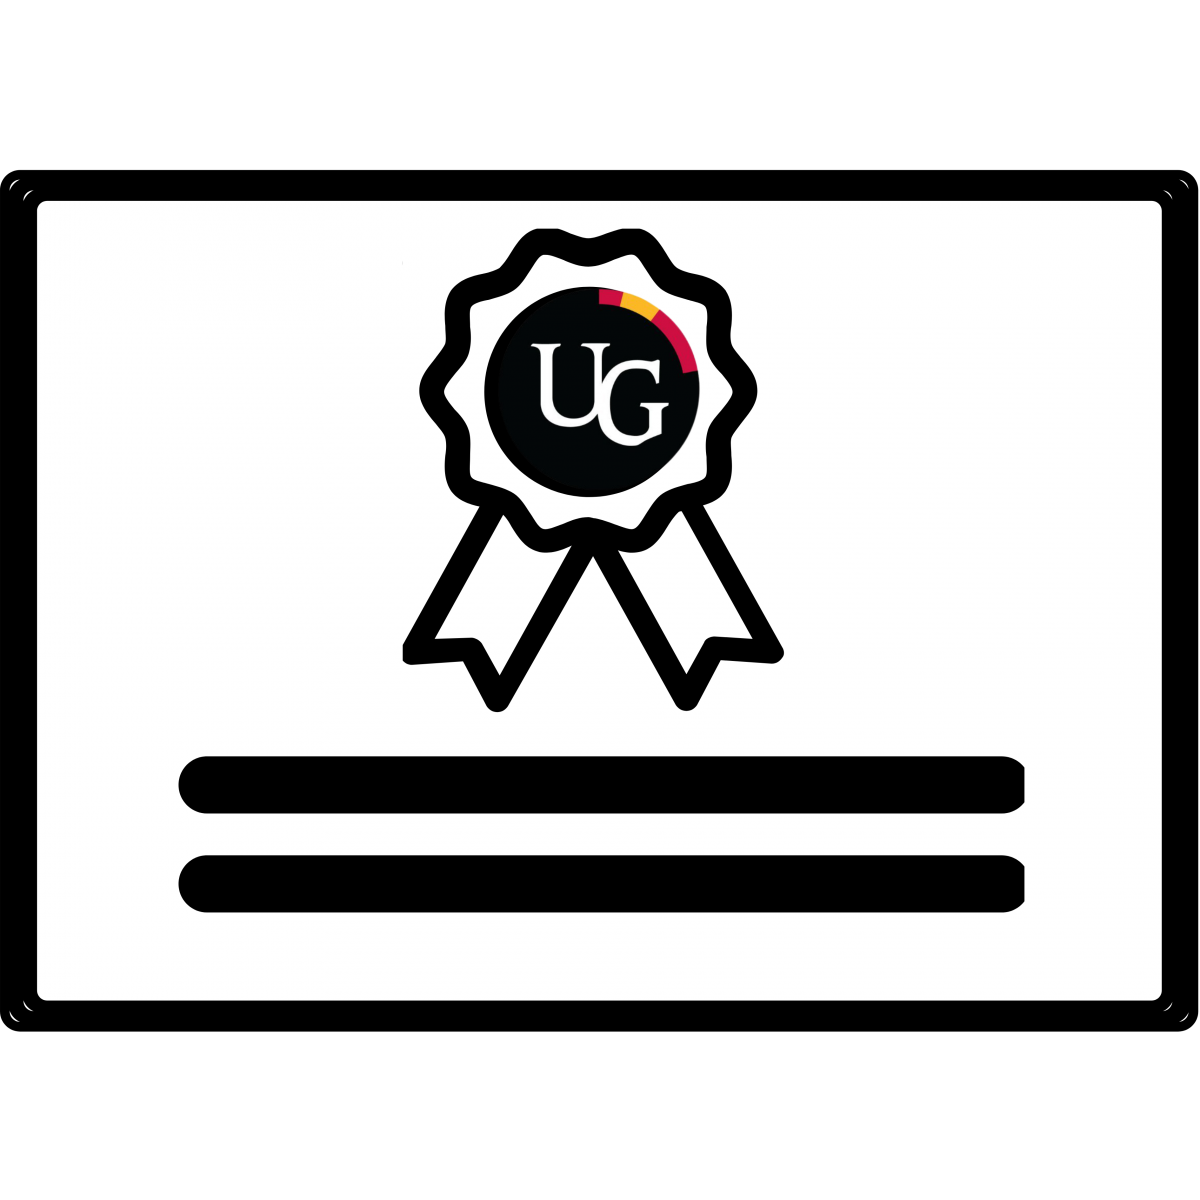 An icon of a certificate award with University of Guelph logo.